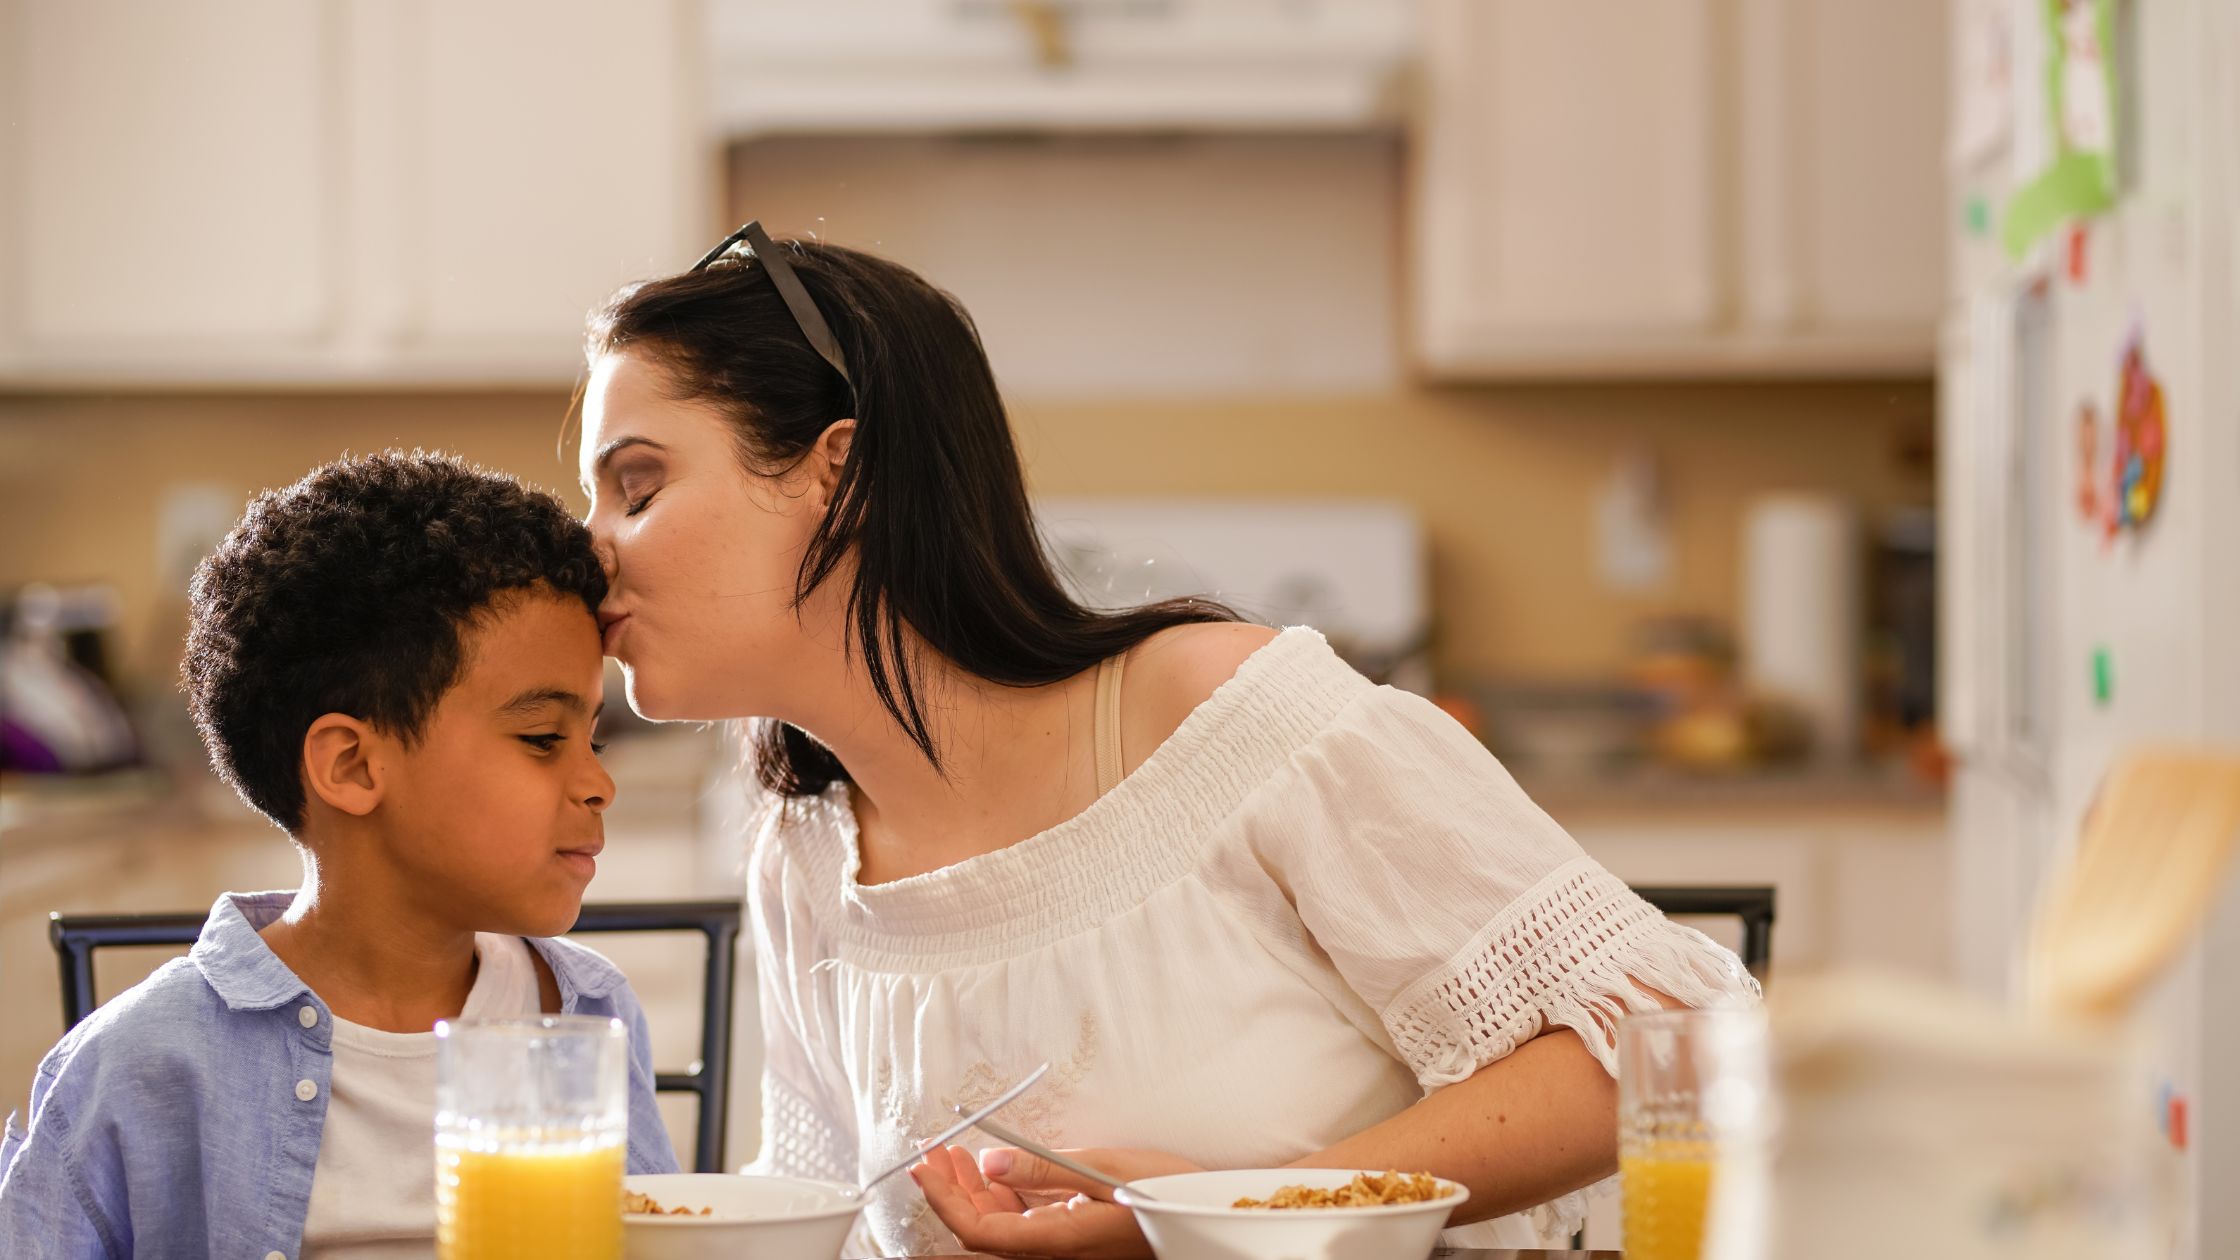 10 Positive Phrases to Empower Your Child in the Morning